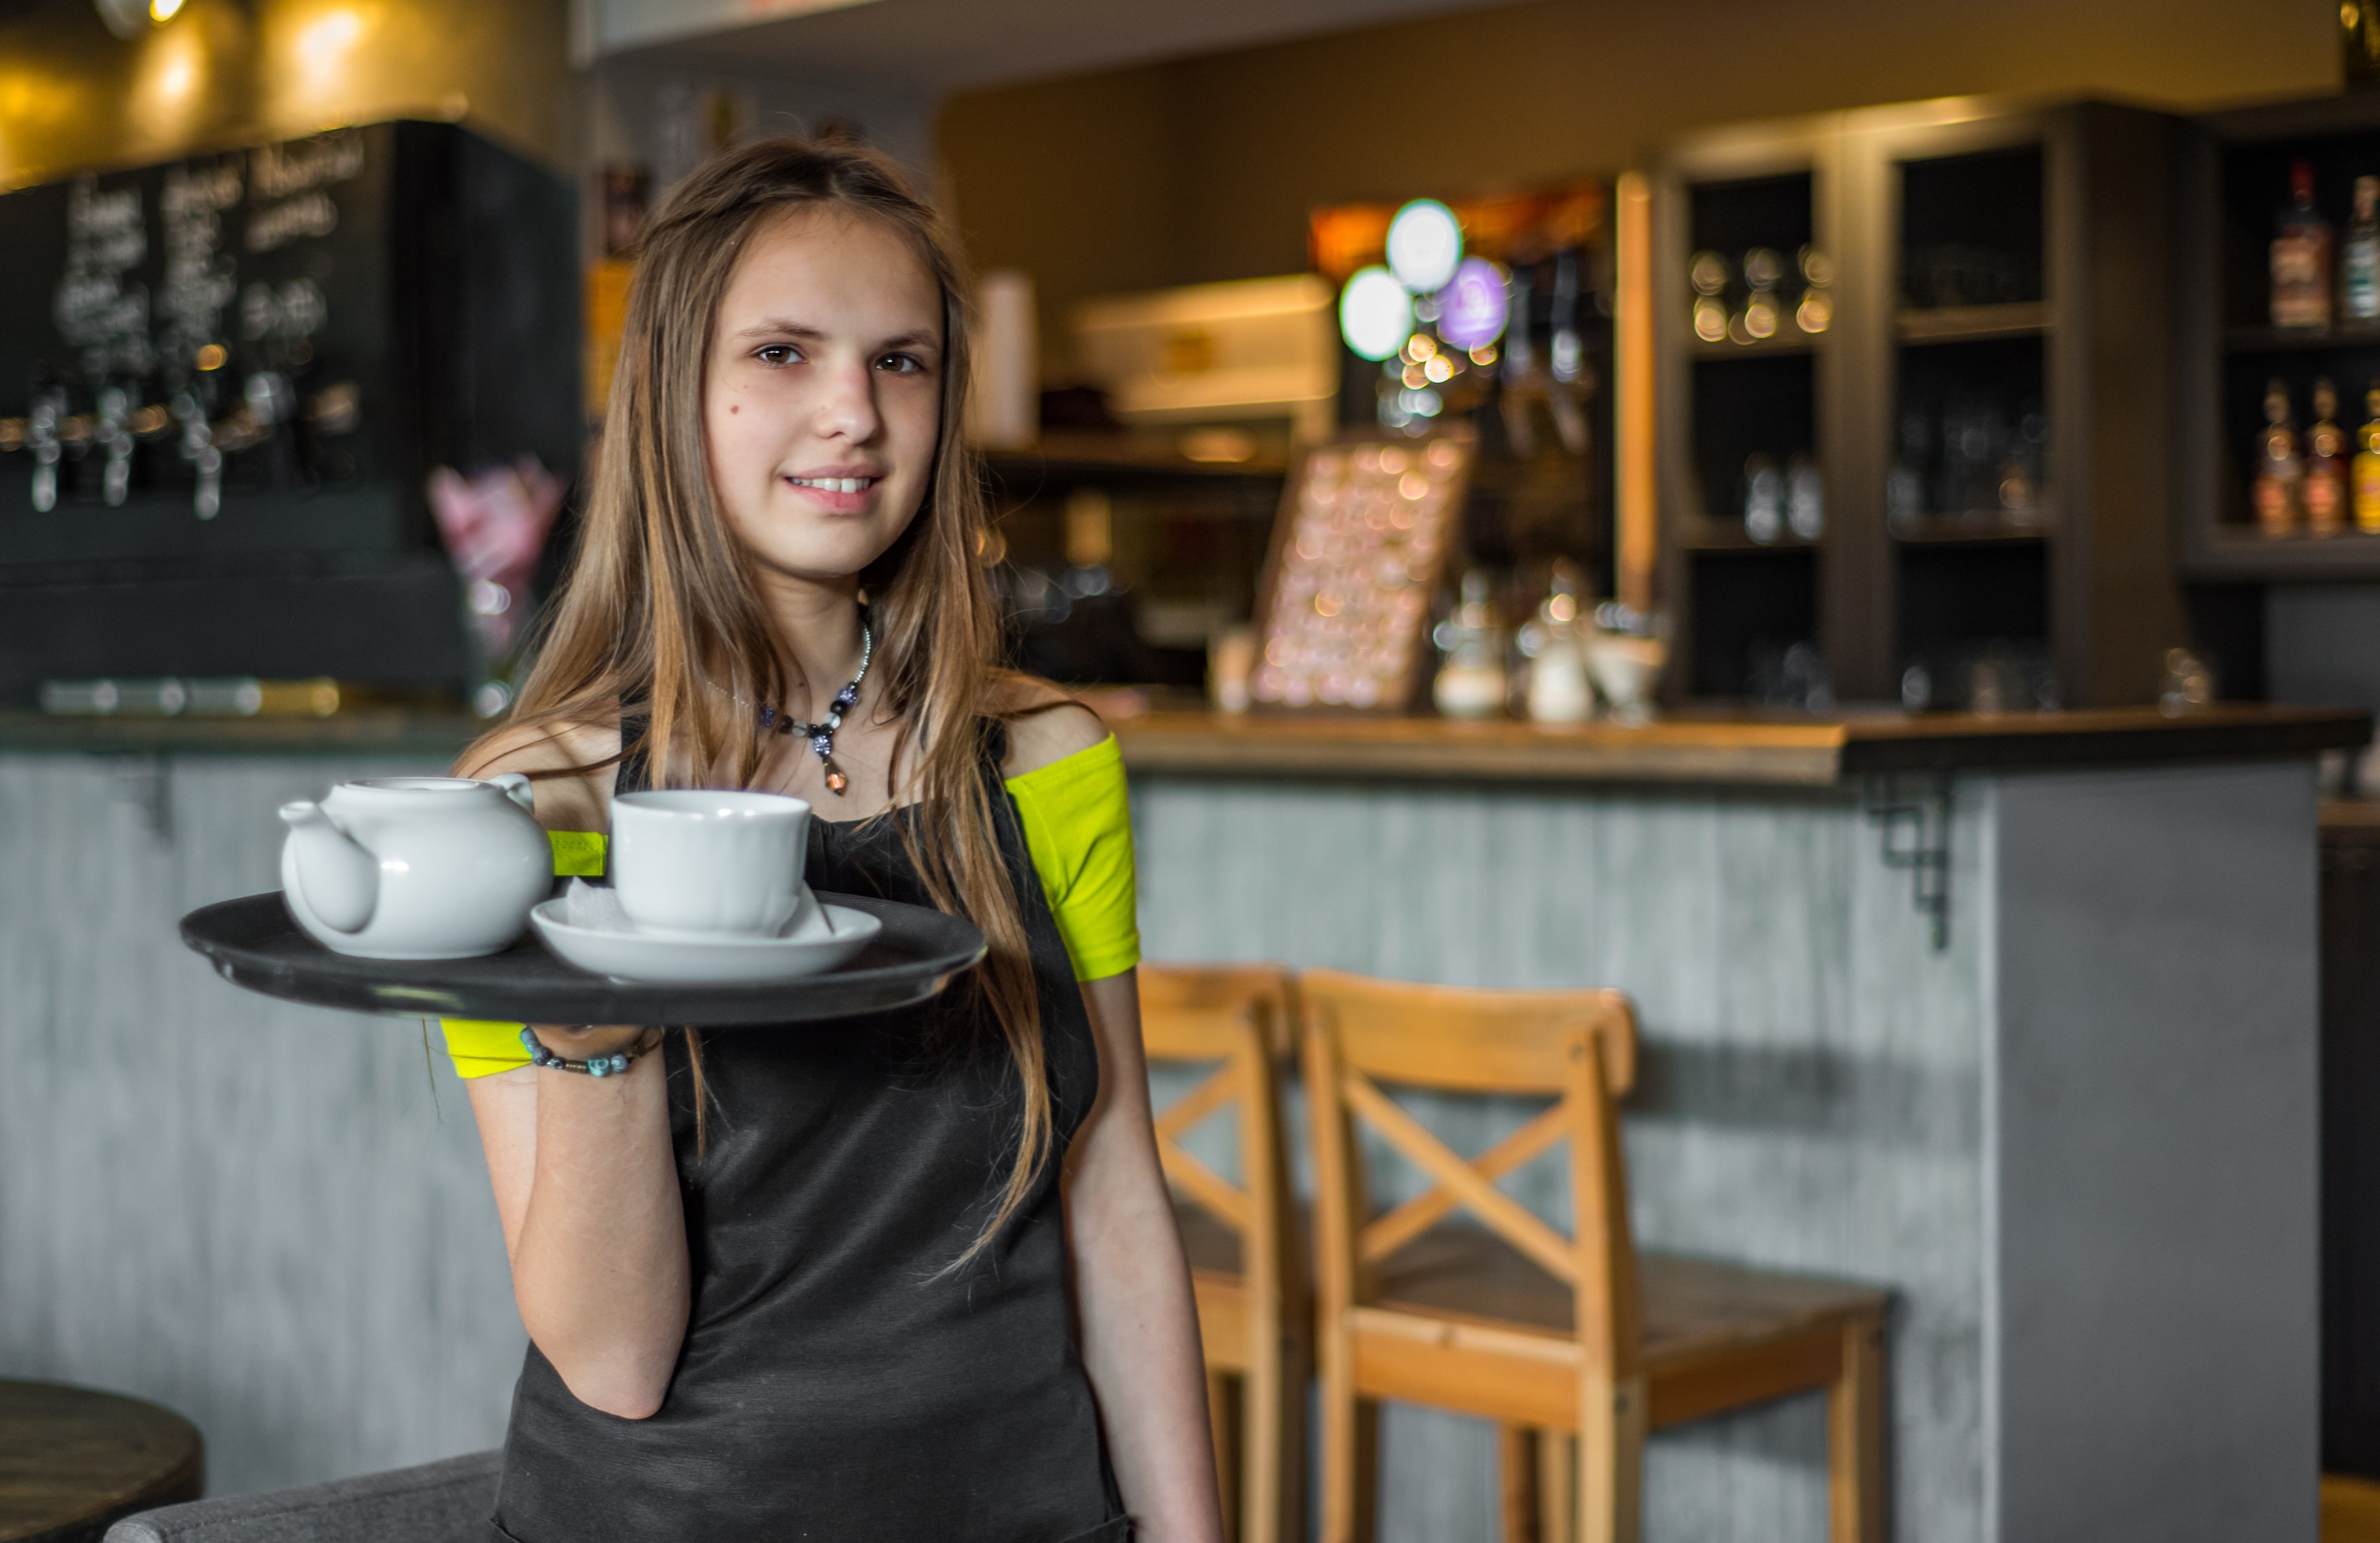 Teenage girl working in a cafe carrying a tray which holds a cup and saucer and a teapot.